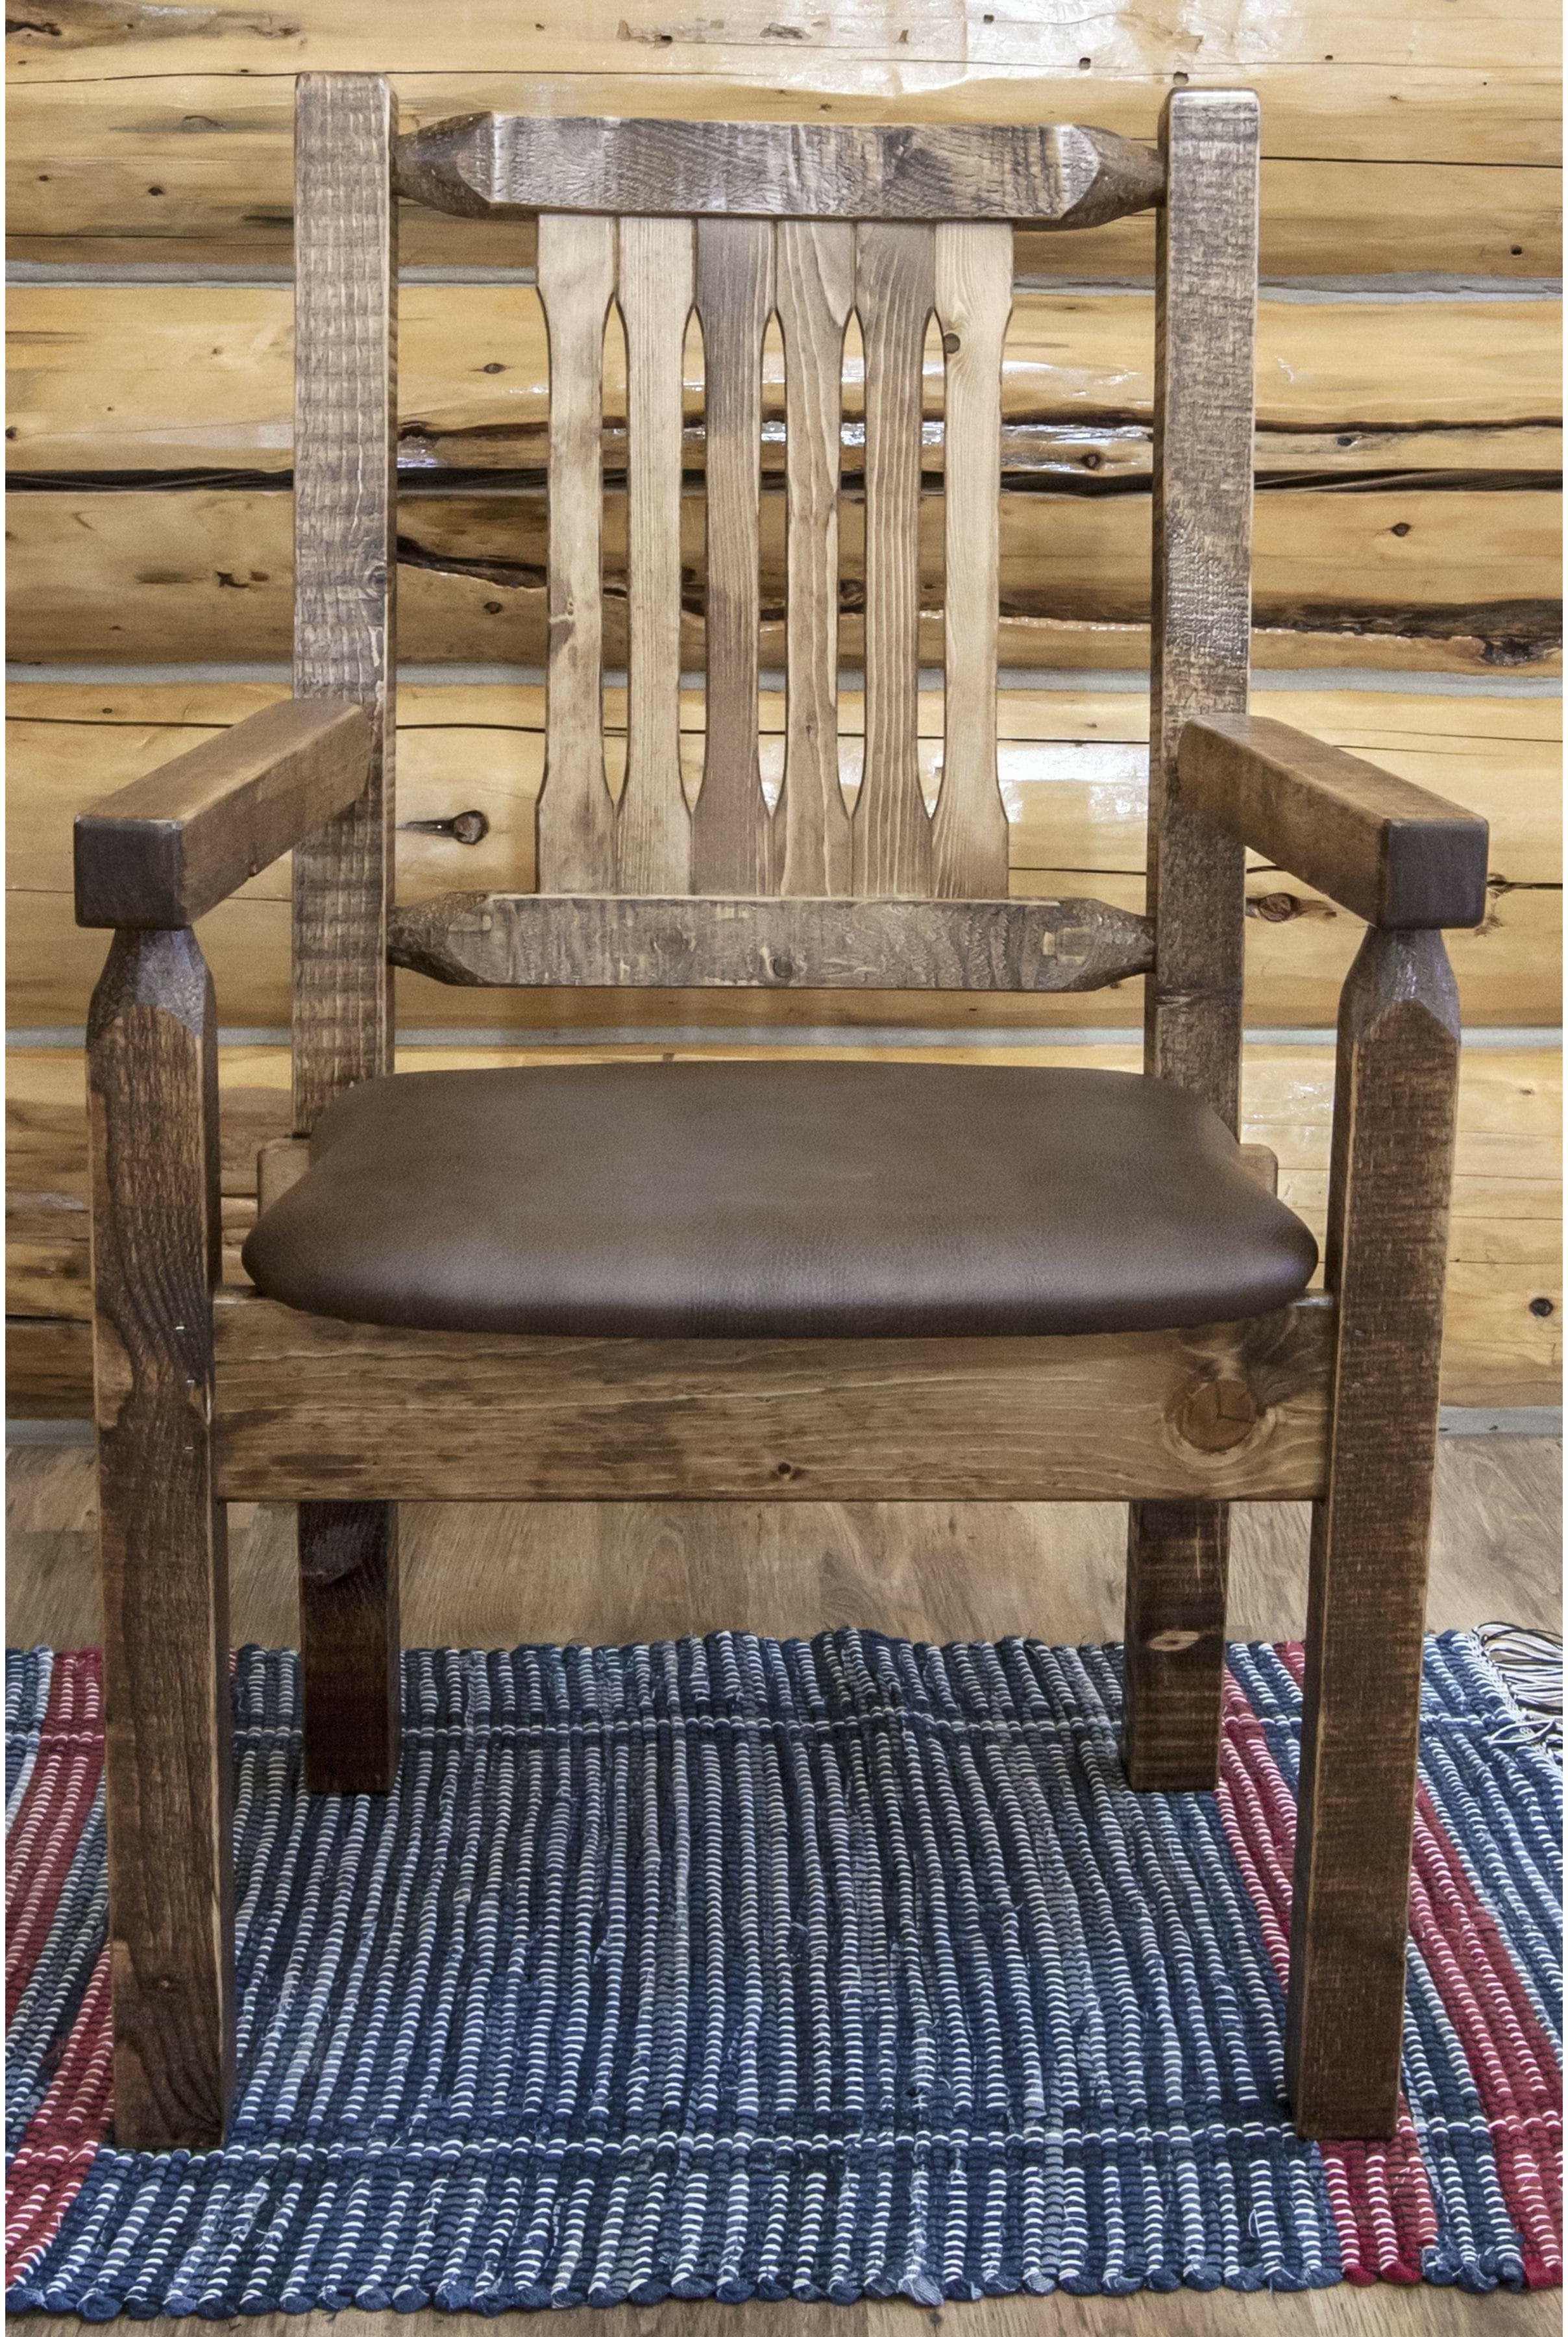 Montana Woodworks Homestead Collection Captain's Chair with Upholstered Seat - Stain & Clear Lacquer Finish-Rustic Furniture Marketplace